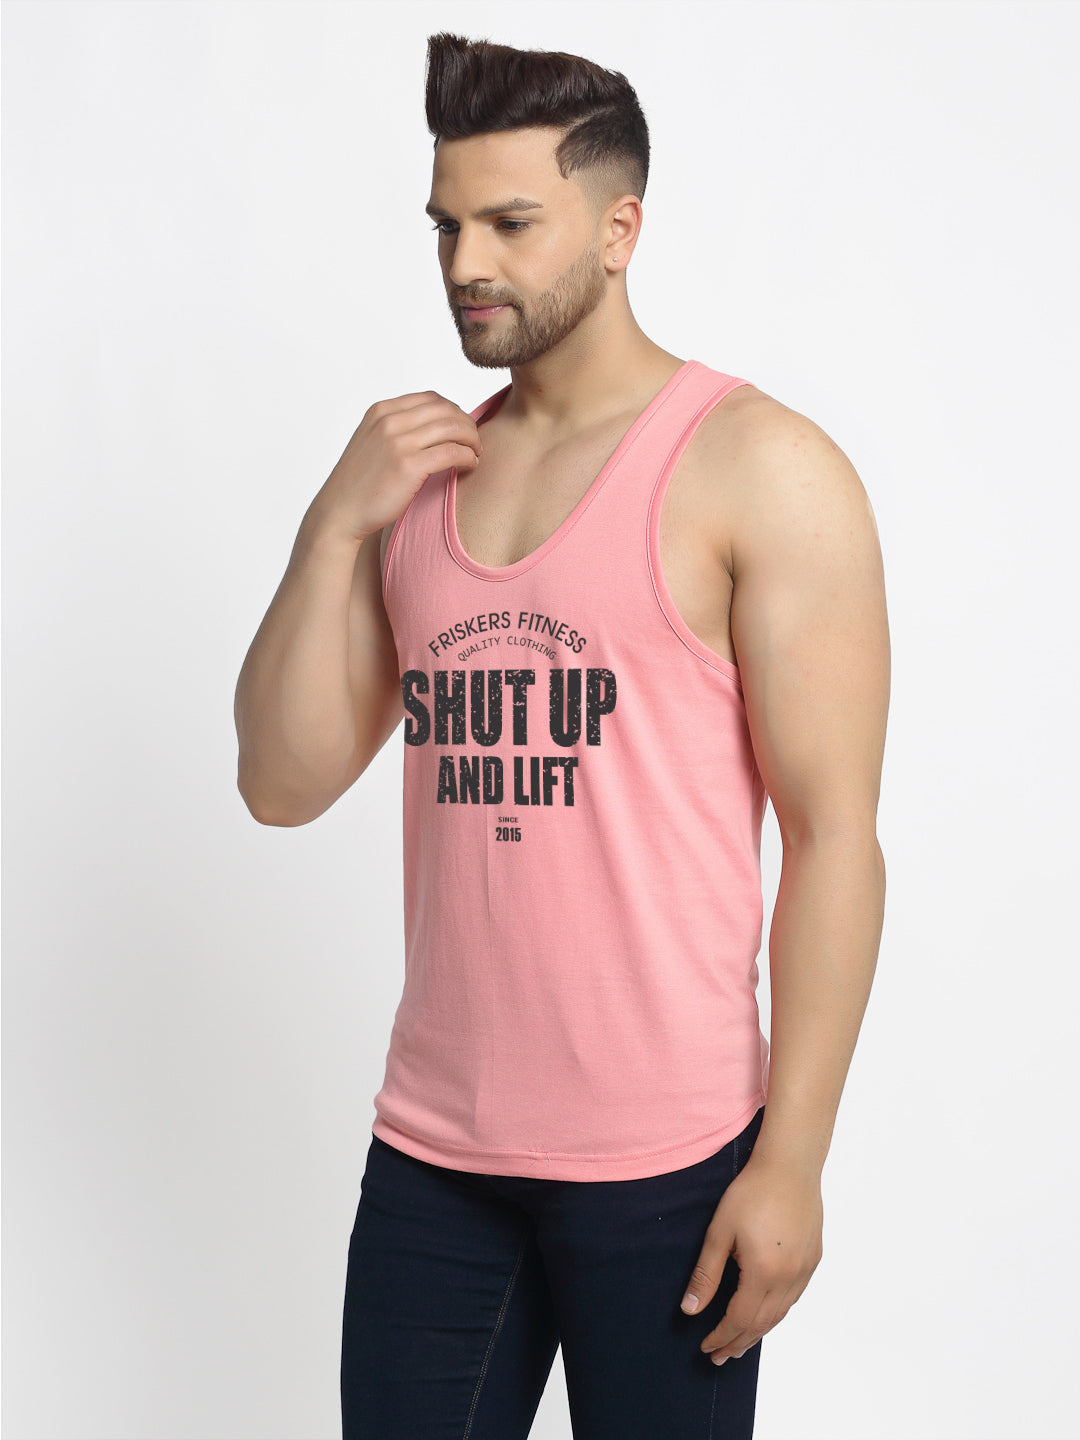 Men's Shut Up And Lift printed Sleeveless Pure Cotton Gym Vest - Friskers